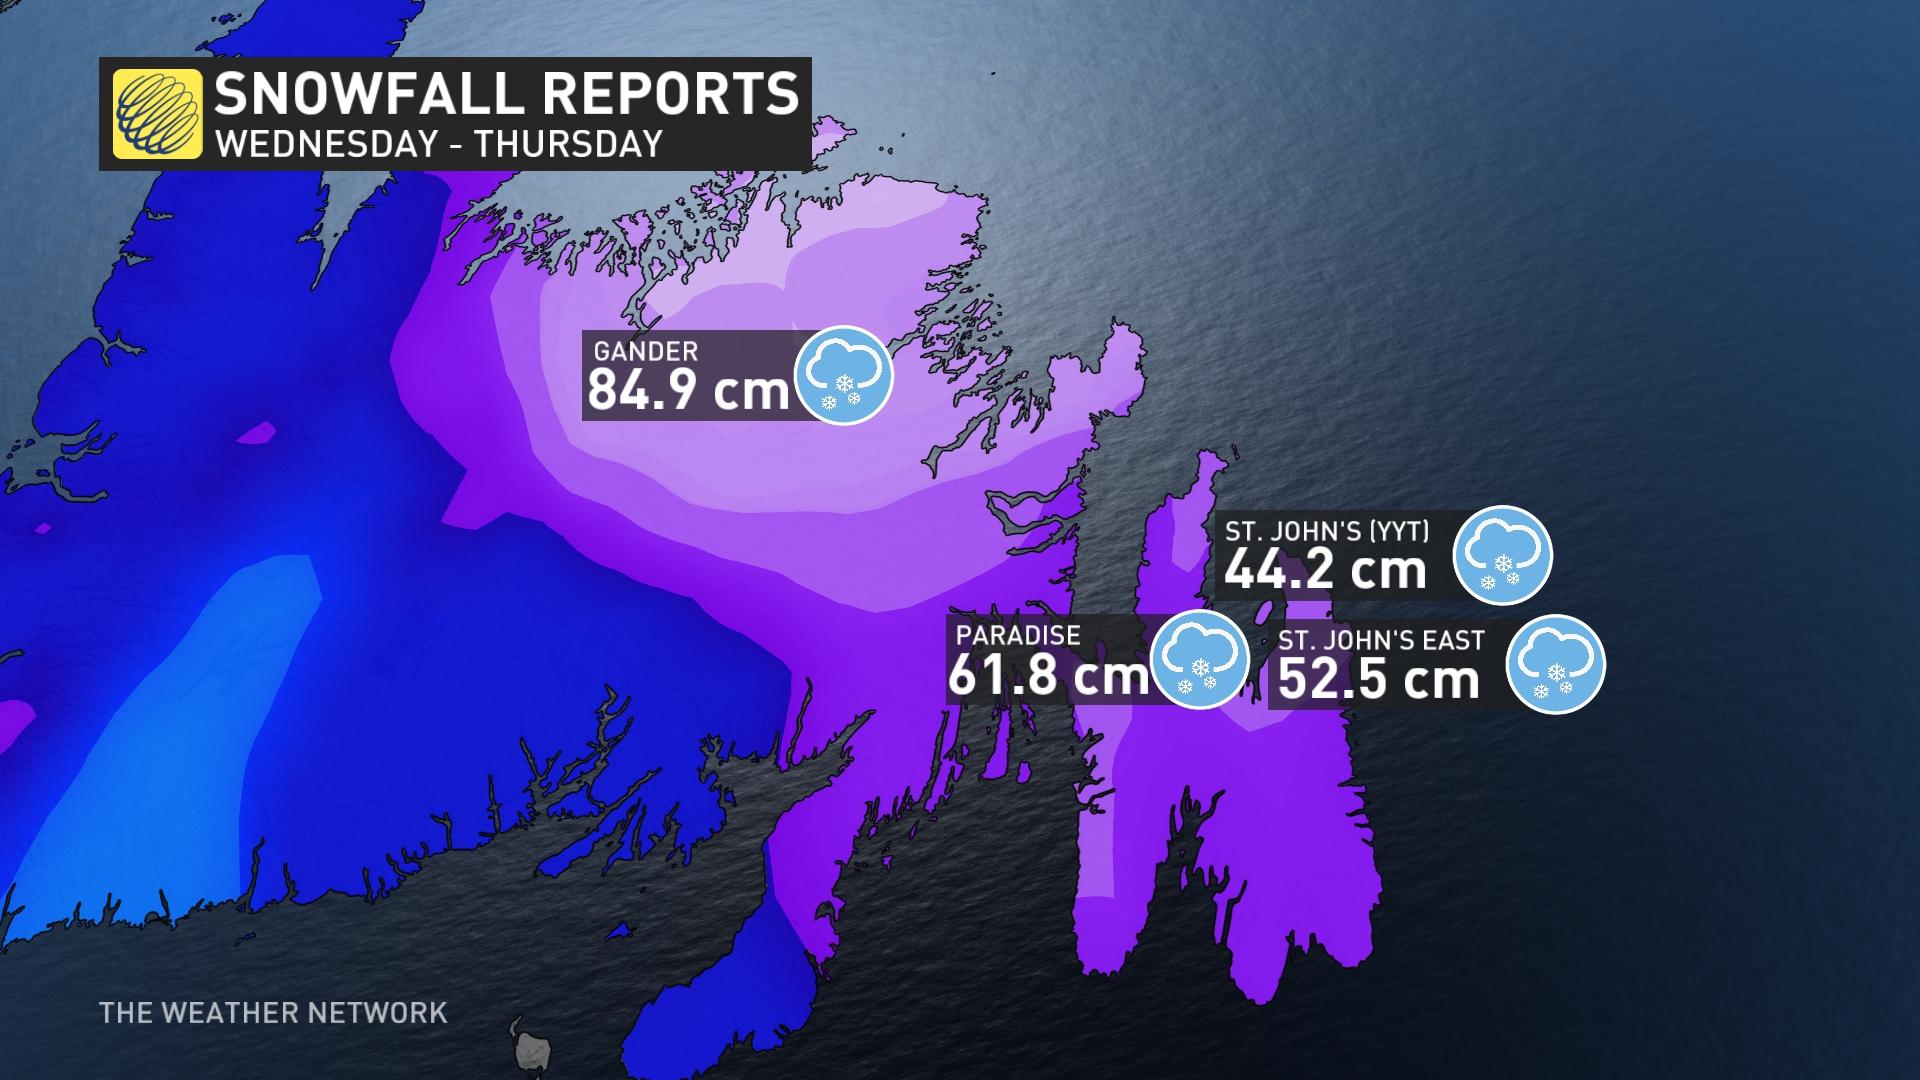 whiteouts expected as heavy weekend snow aims for newfoundland